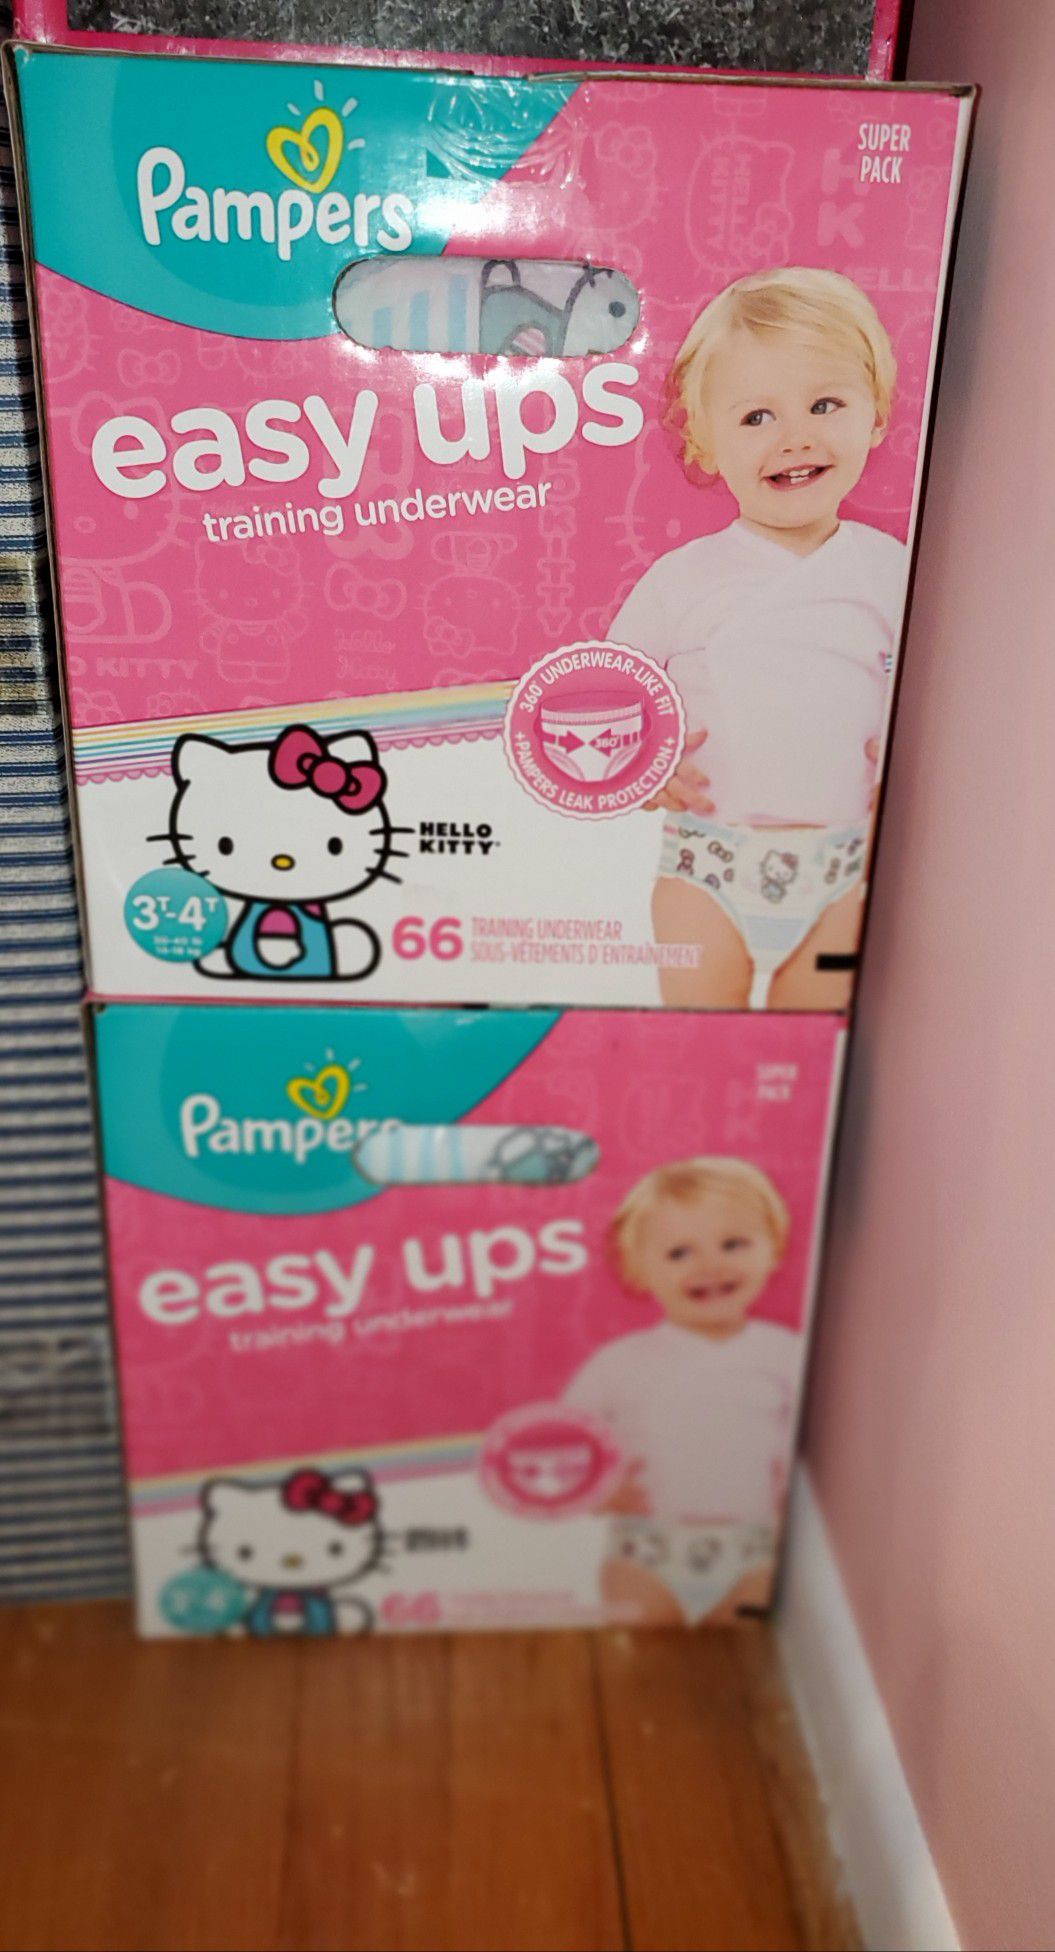 Pampers Easy Ups training pants Hello Kitty design Size 3T/4T (30-40 pounds) 66 Easy Ups per box 2 boxes avaliable 